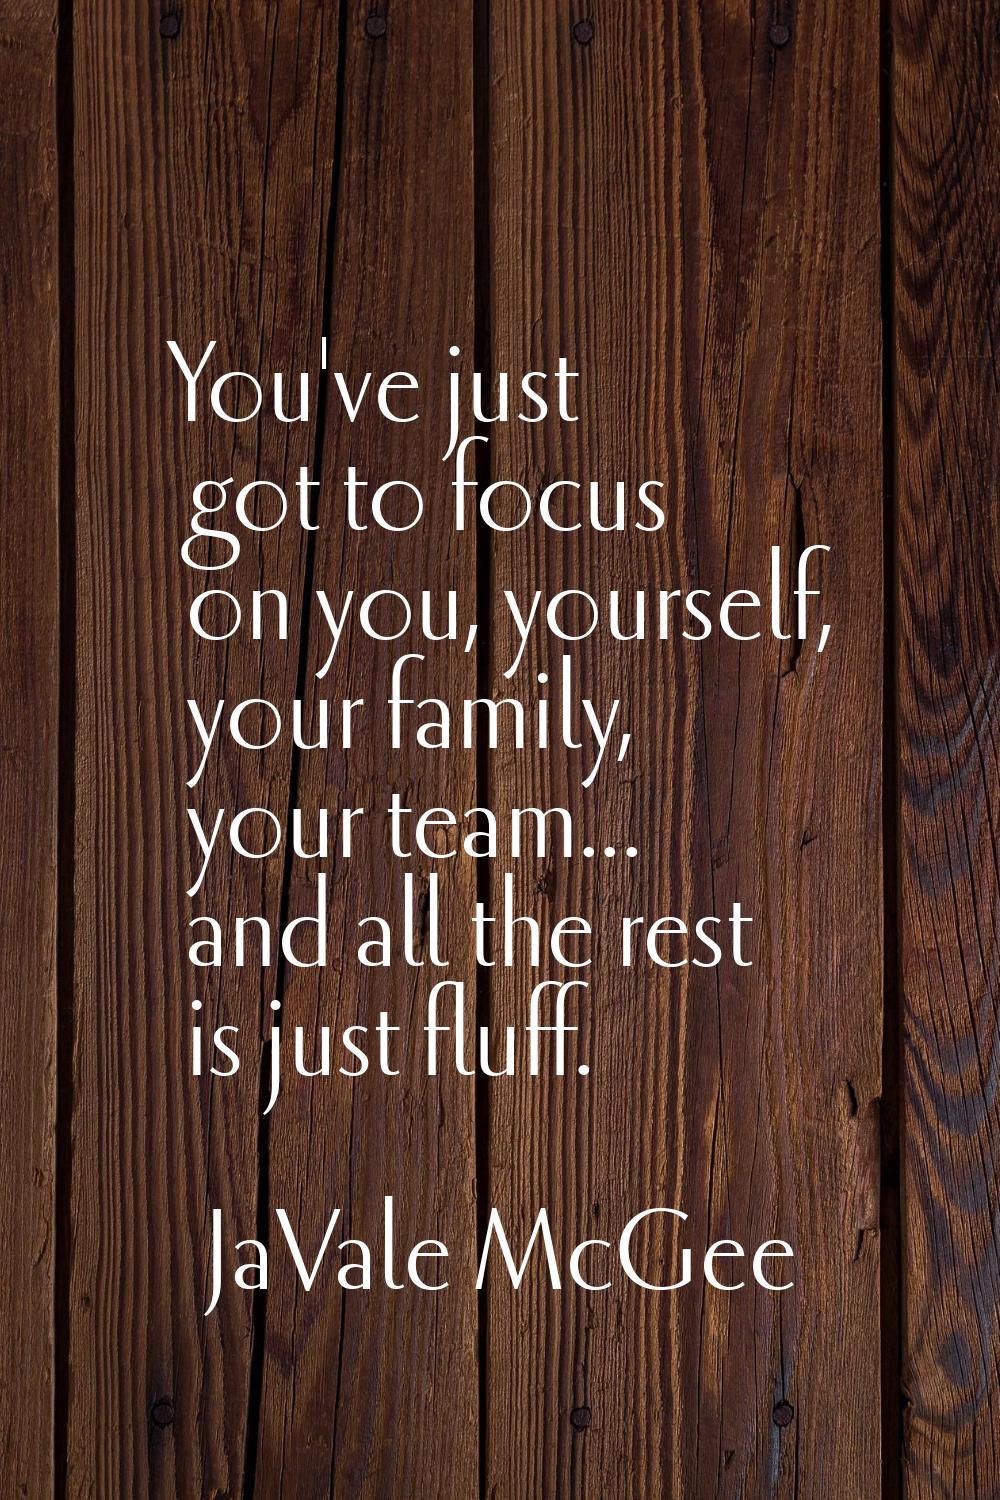 You've just got to focus on you, yourself, your family, your team... and all the rest is just fluff